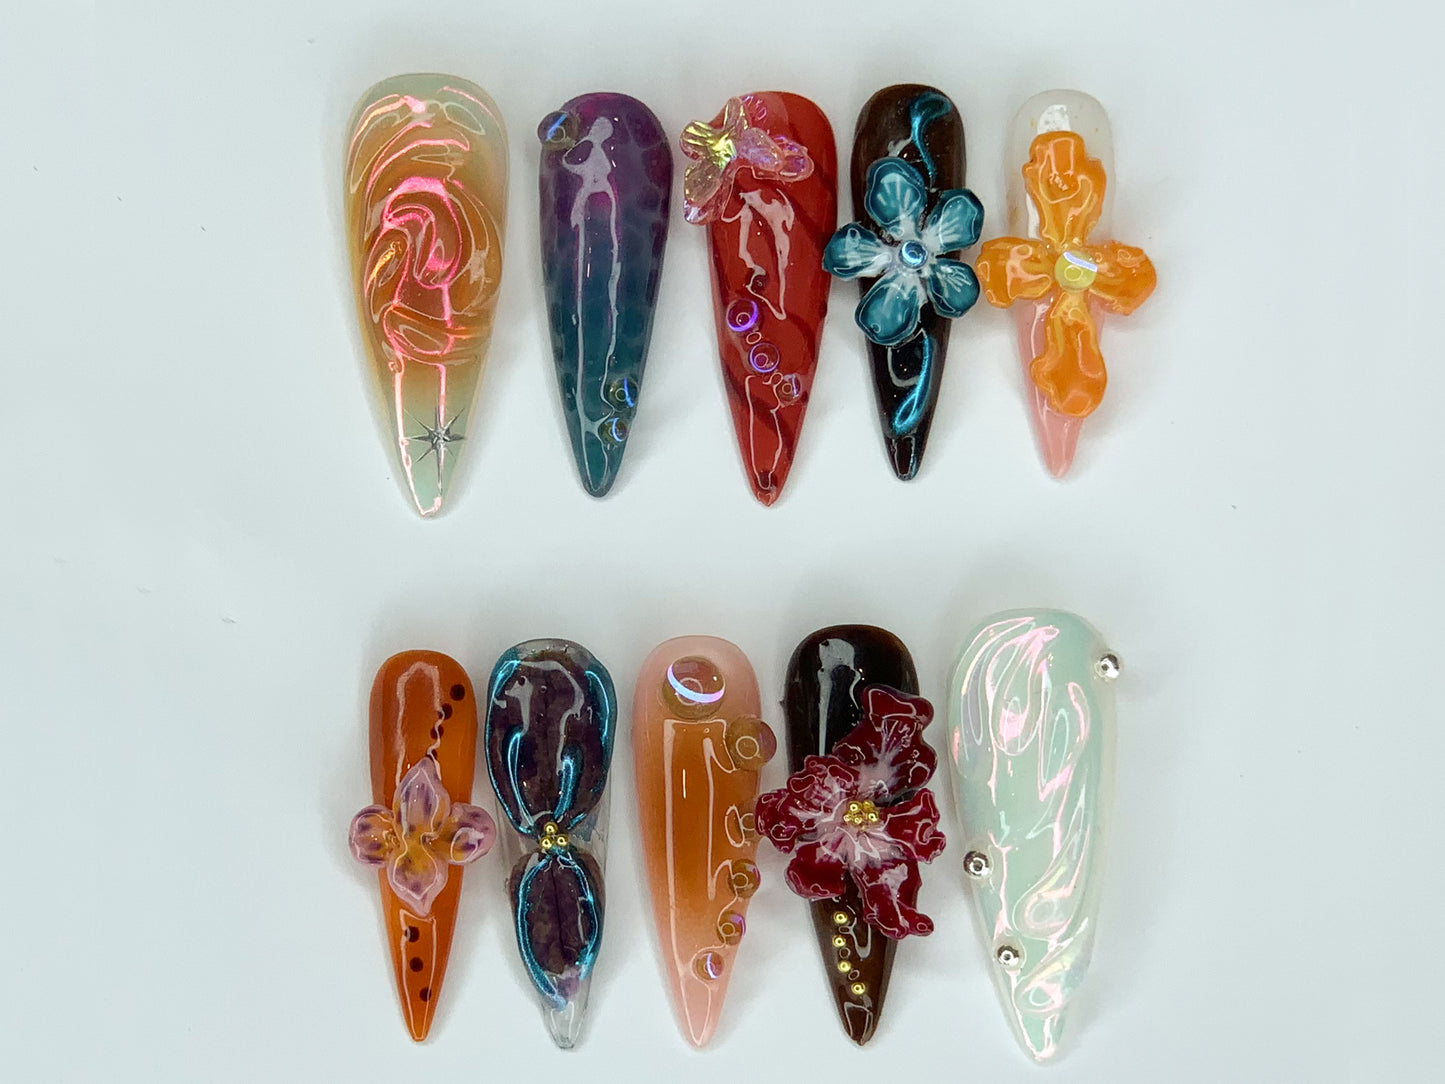 3D Flower Long Stiletto Handmade Press On Nails | Spring Floral Garden Theme | Prom Nails | Butterfly Charm | Gift For Her | J256